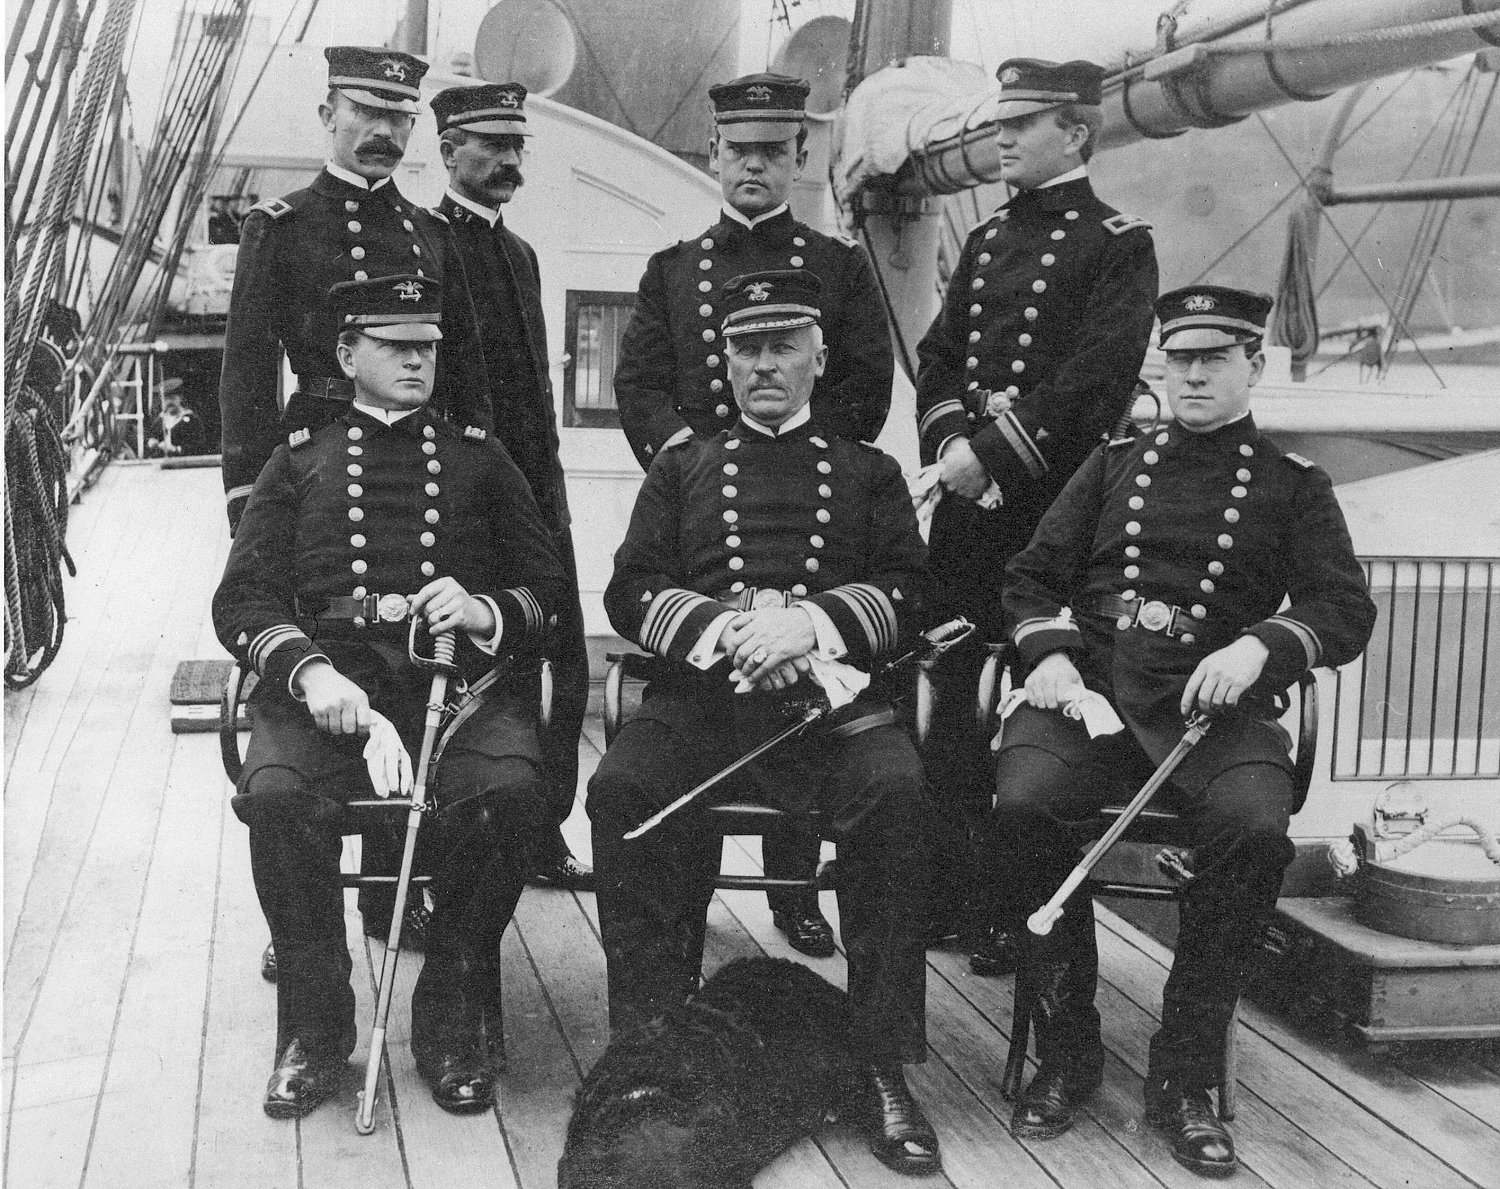 Photograph of Capt. Oscar Hamlet with officers of Revenue Cutter Thetis with ship’s mascot at his feet. (U.S. Coast Guard)